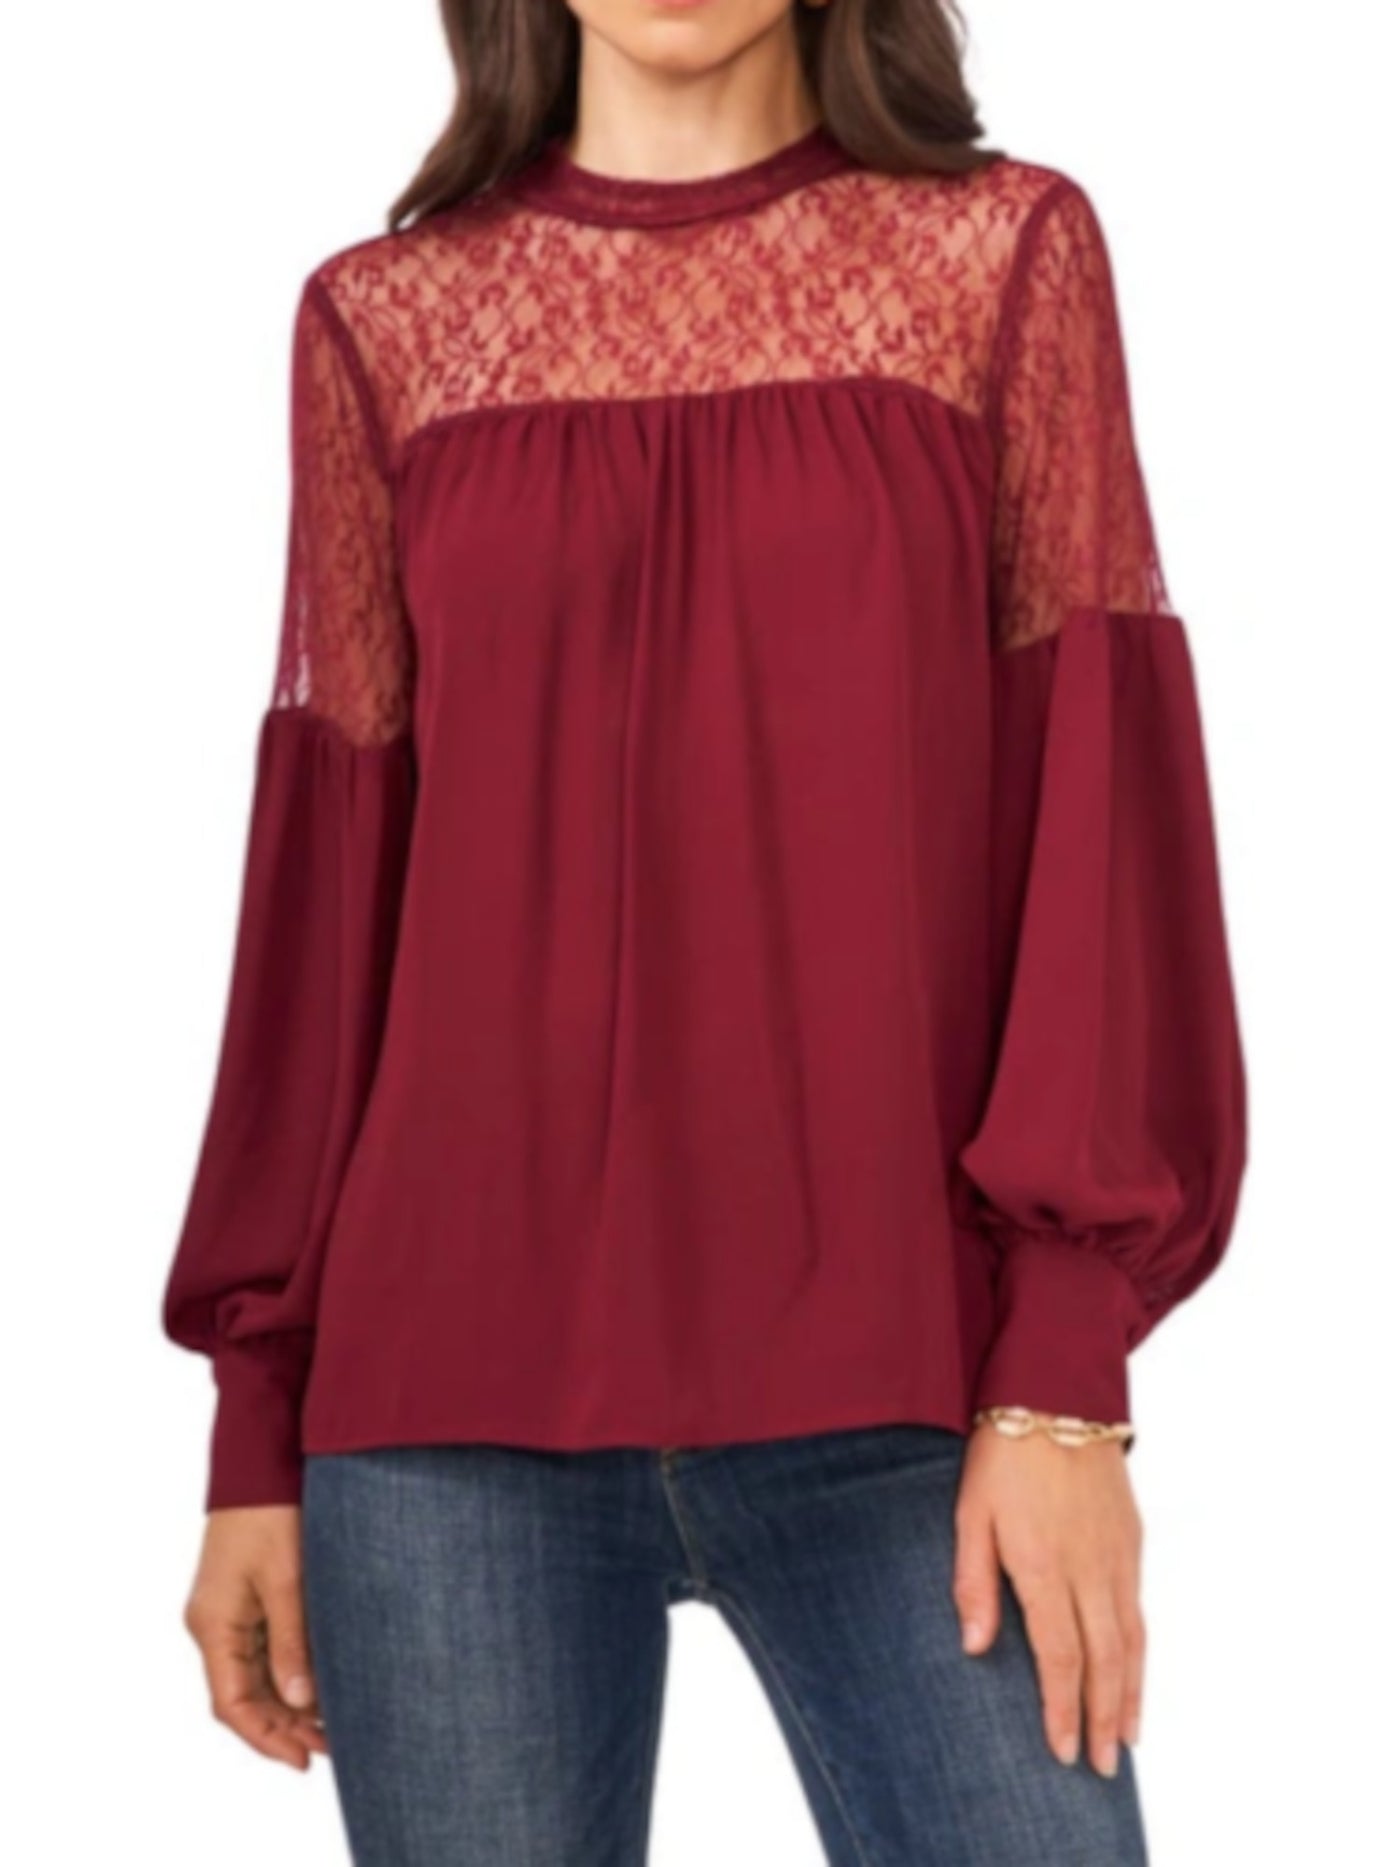 VINCE CAMUTO Womens Burgundy Lace Relaxed Fit Keyhole Back Balloon Sleeve Mock Neck Wear To Work Blouse L